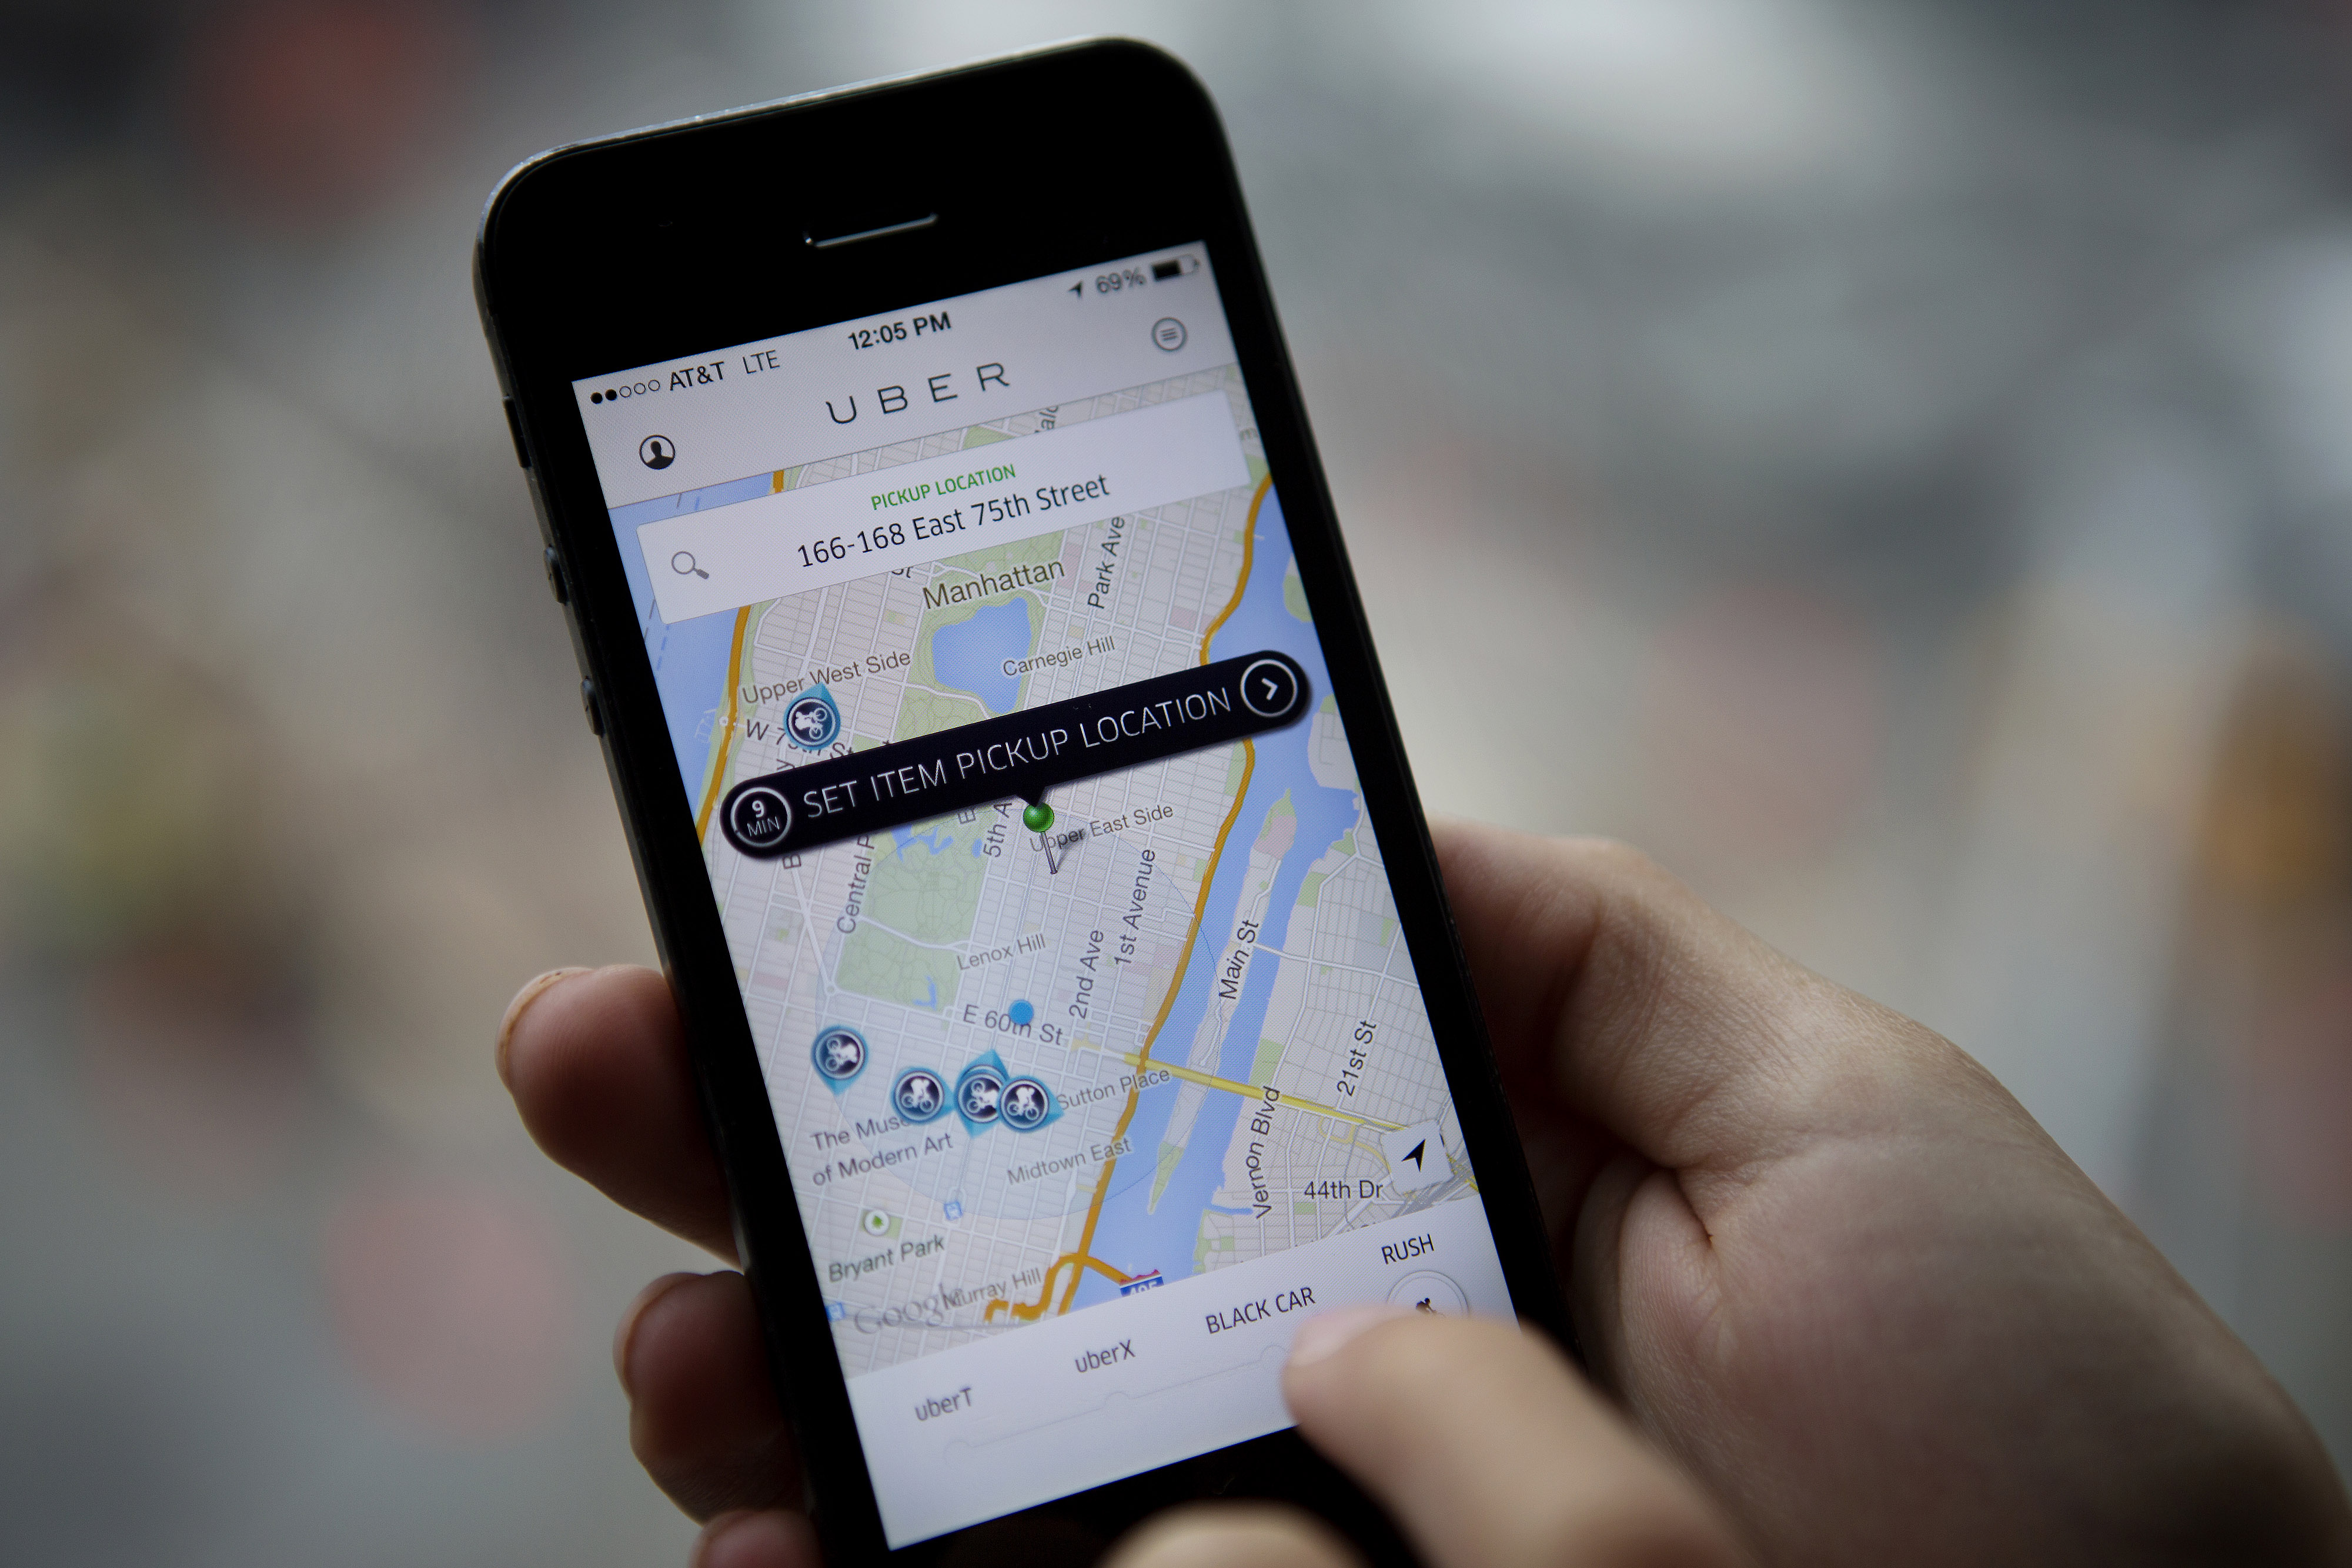 Th Uber Technologies Inc. car service application (app) is demonstrated for a photograph on an Apple Inc. iPhone in New York, U.S., on Wednesday, Aug. 6, 2014. (Bloomberg&mdash;Bloomberg via Getty Images)